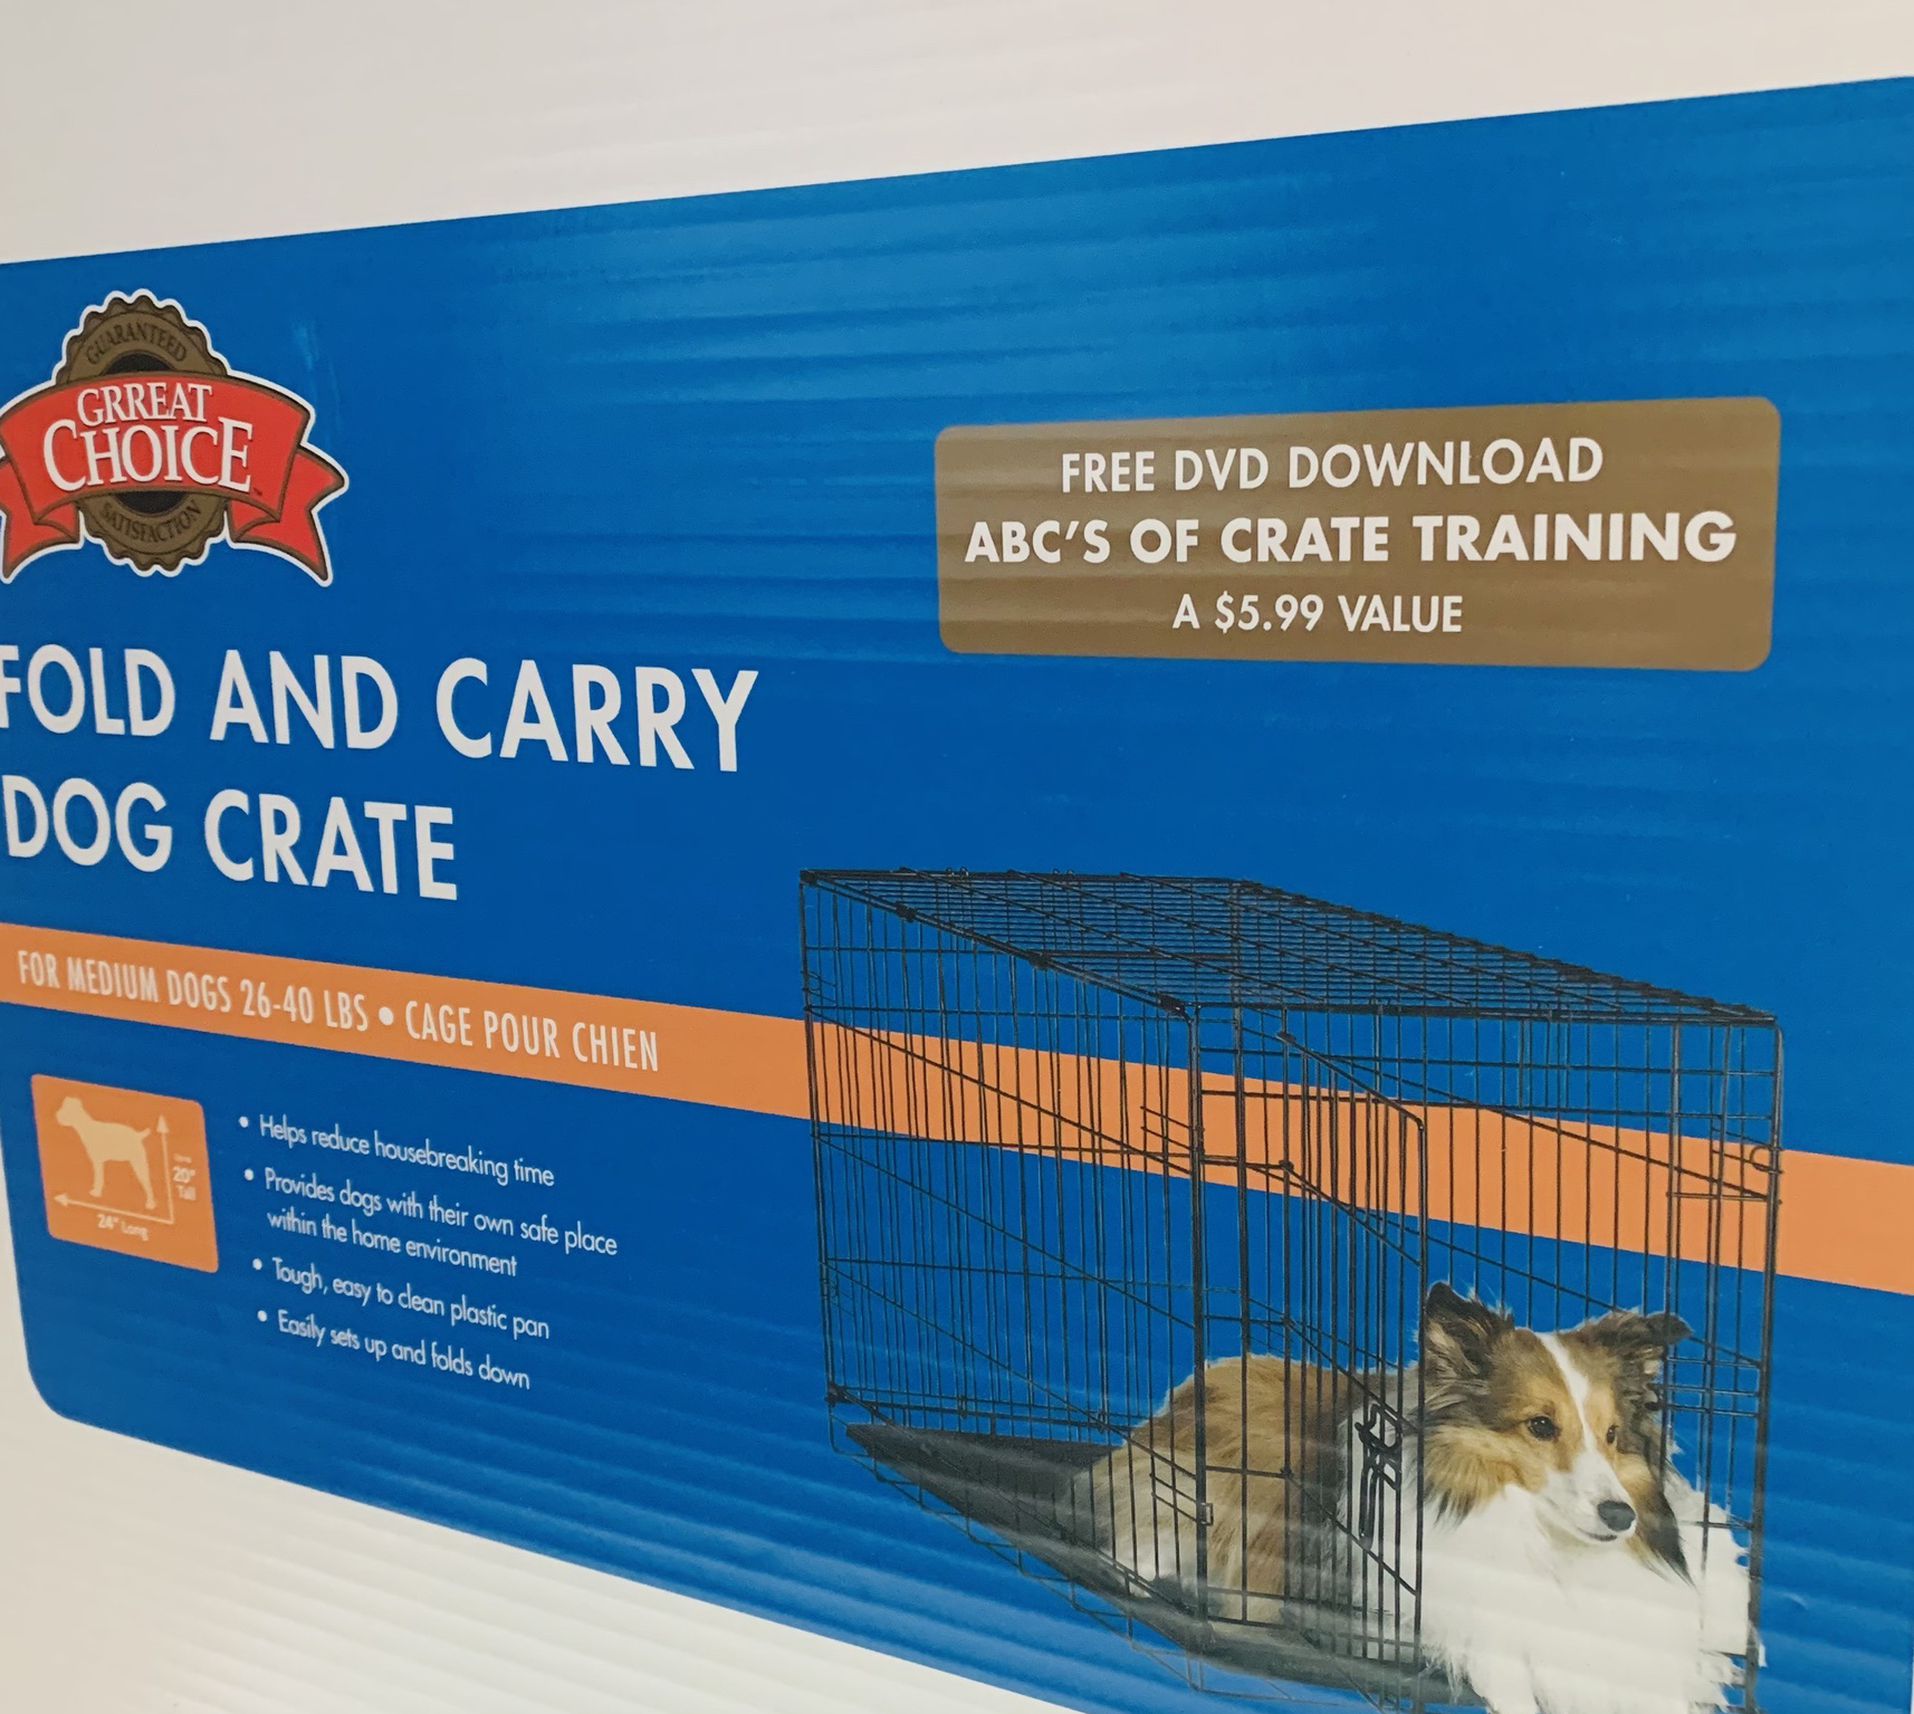 New Crate And Carry For Medium Dogs!